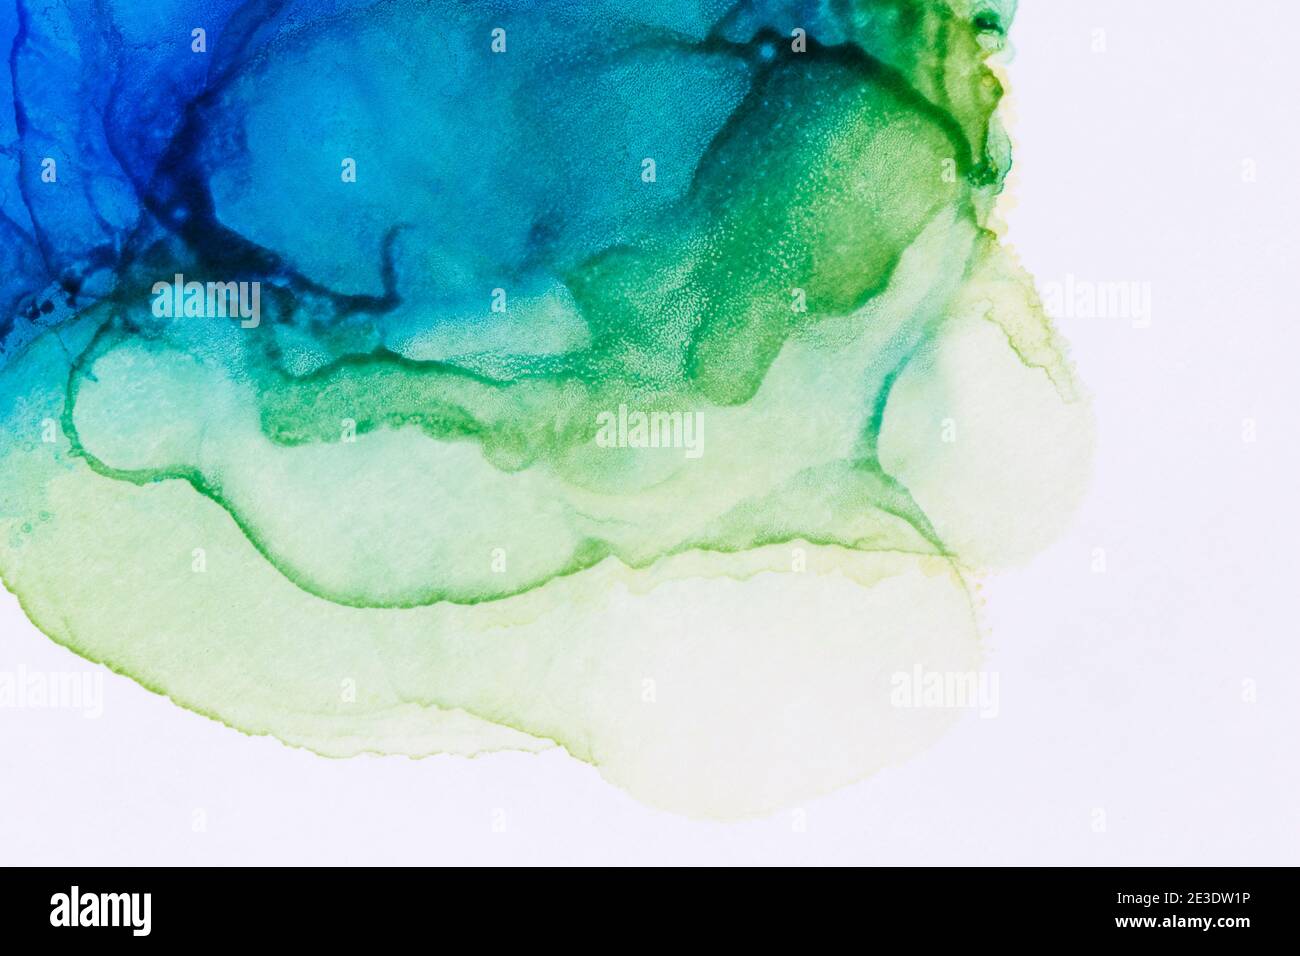 Macro close-up of abstract blue and green alcohol ink texture on white. Fluid ink, colorful textured background. Vibrant colors. Art for design. Stock Photo